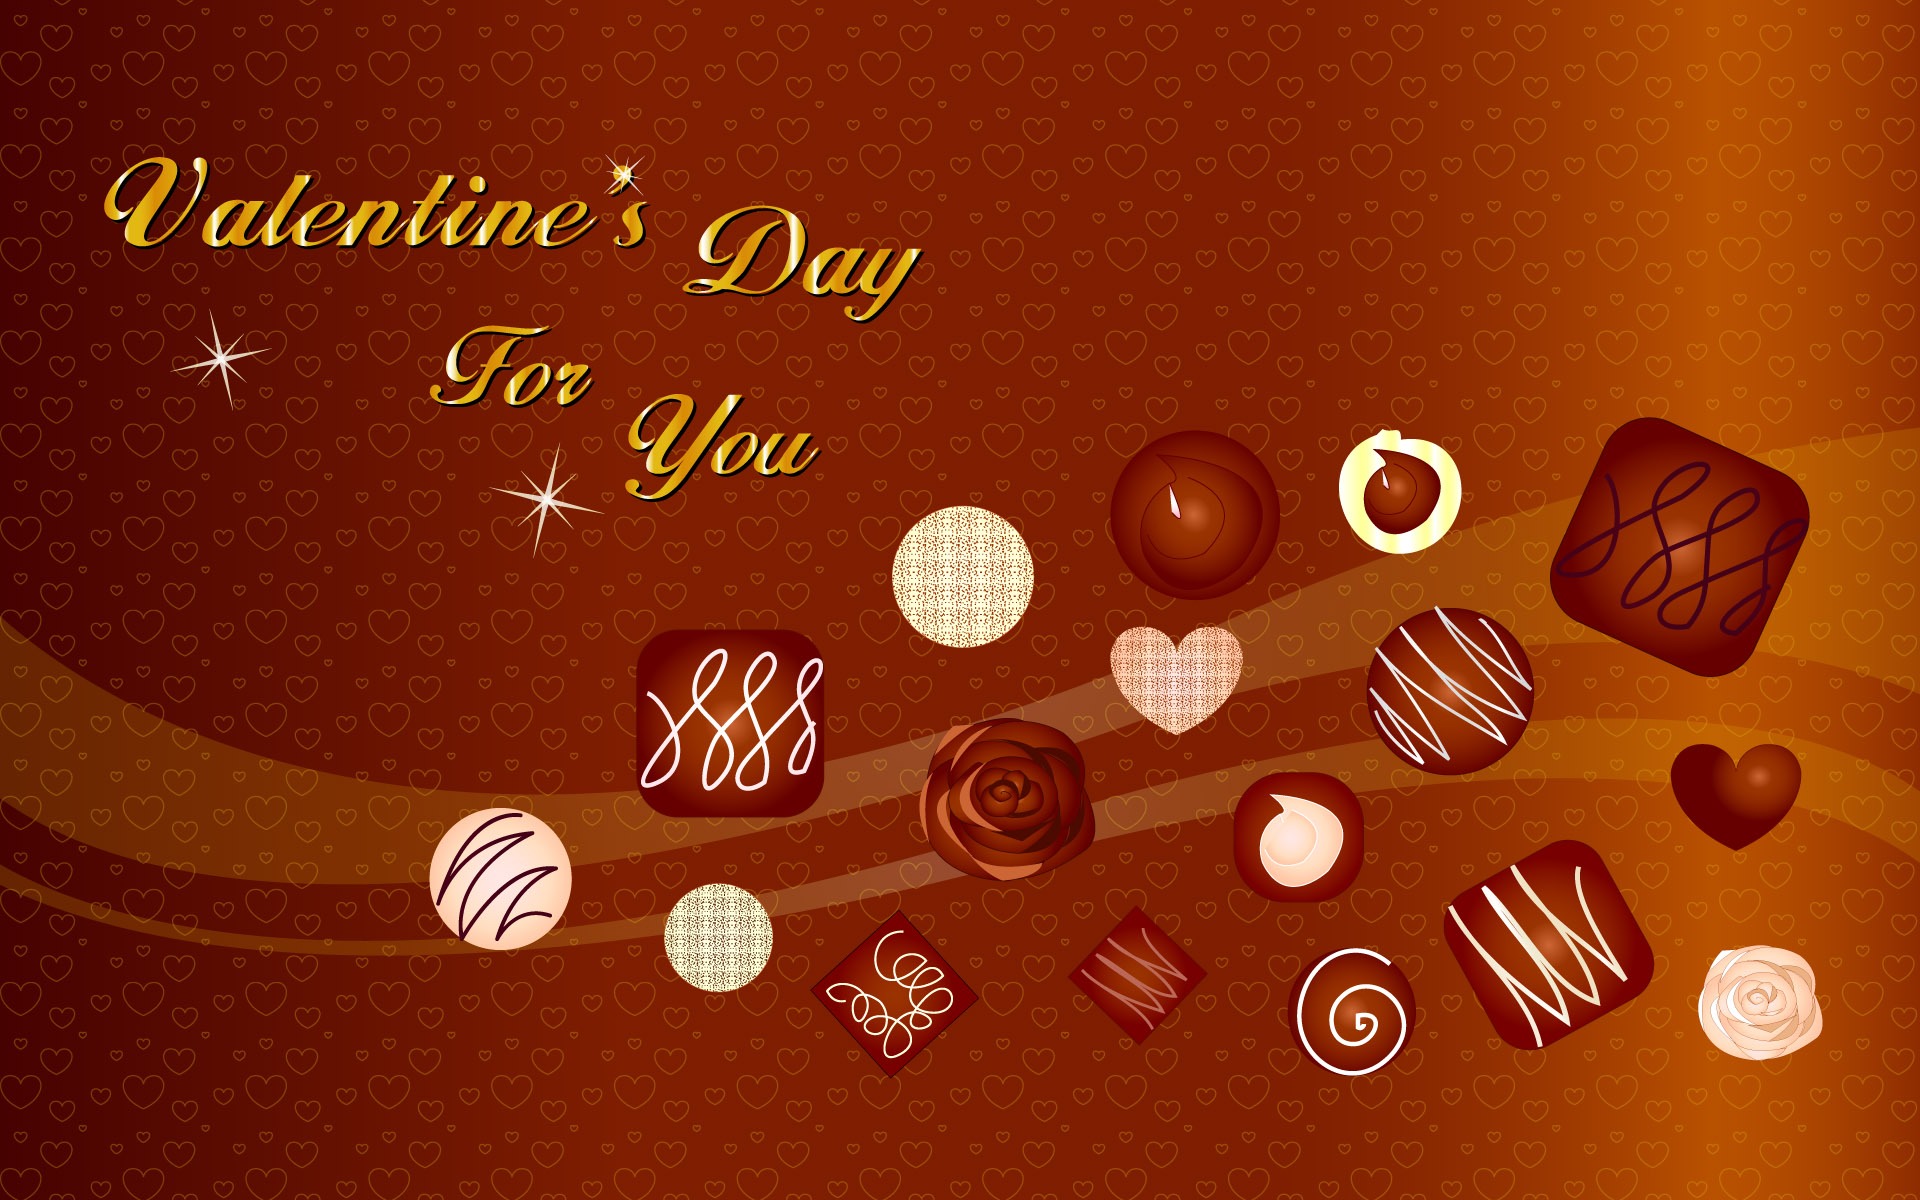 Valentine's Day Theme Wallpapers (1) #3 - 1920x1200